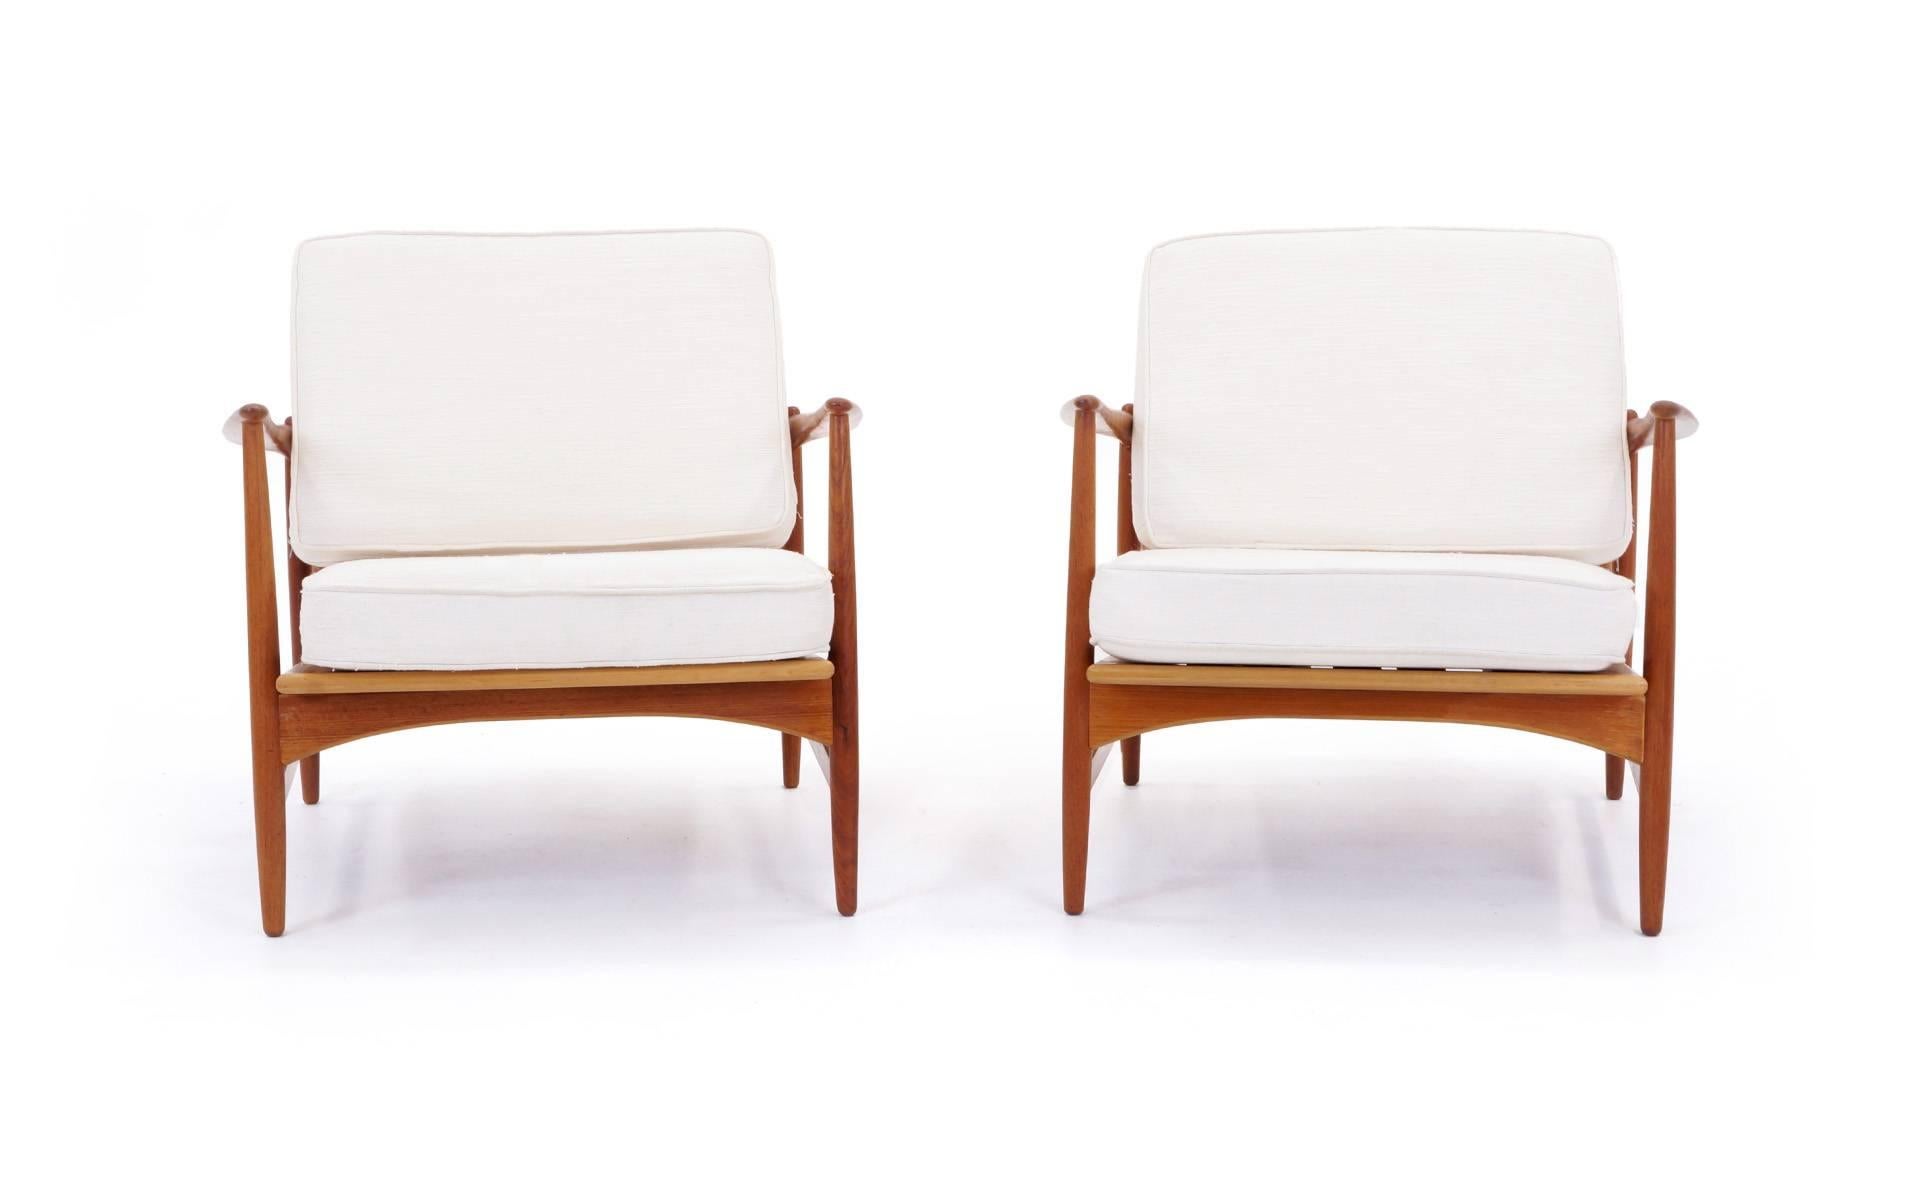 Pair of Kofod Larsen Lounge Chairs.  Teak frames in excellent condition.  Original cushions in good condition.  